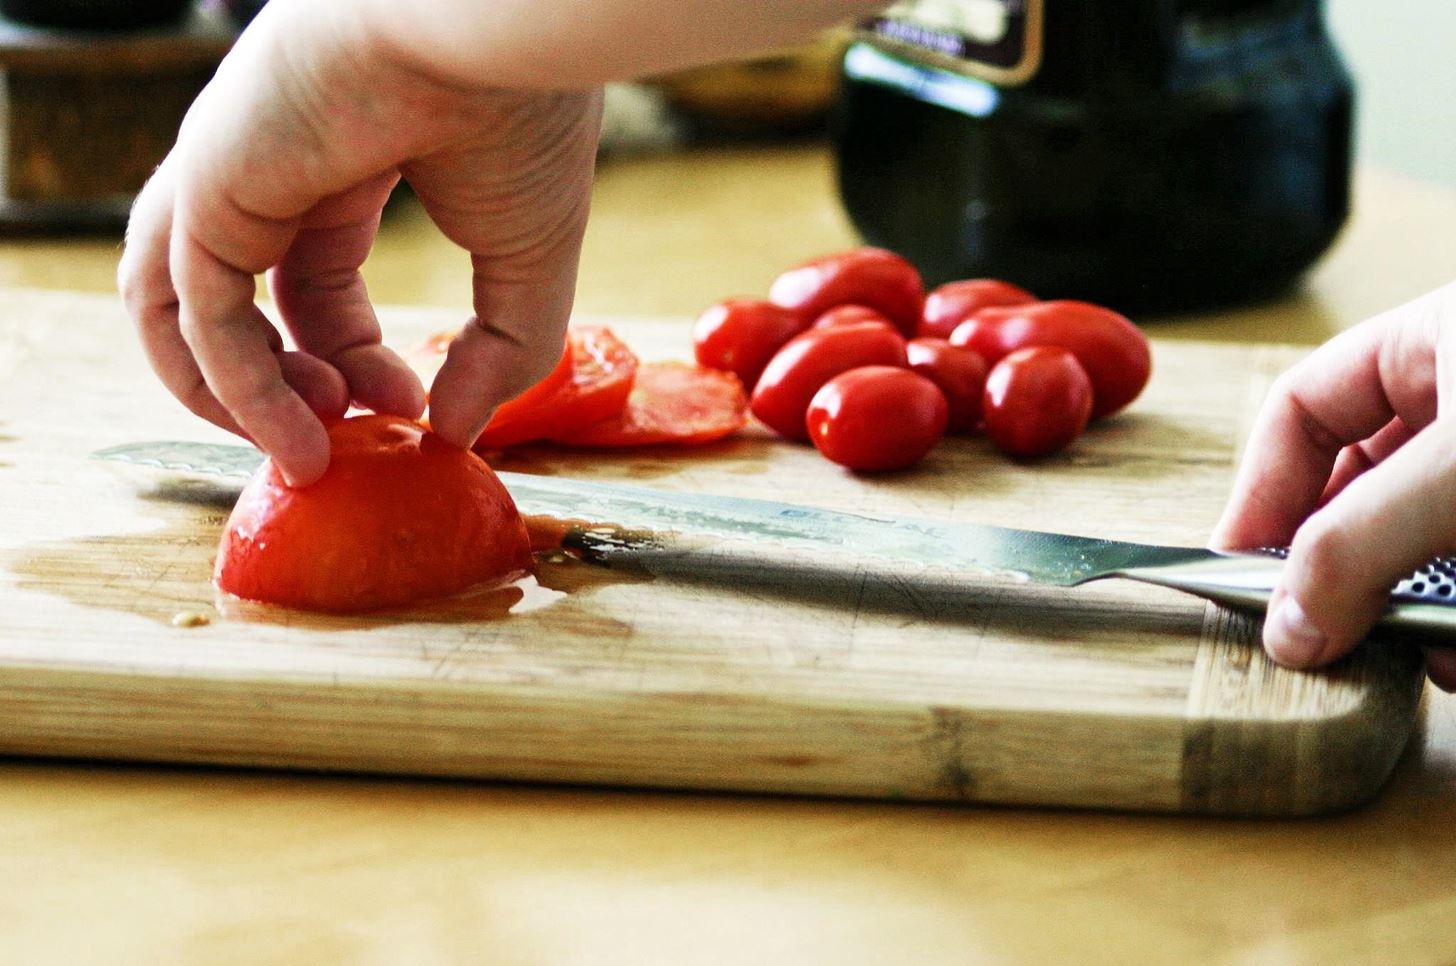 How to Cut Tomatoes the Right Way